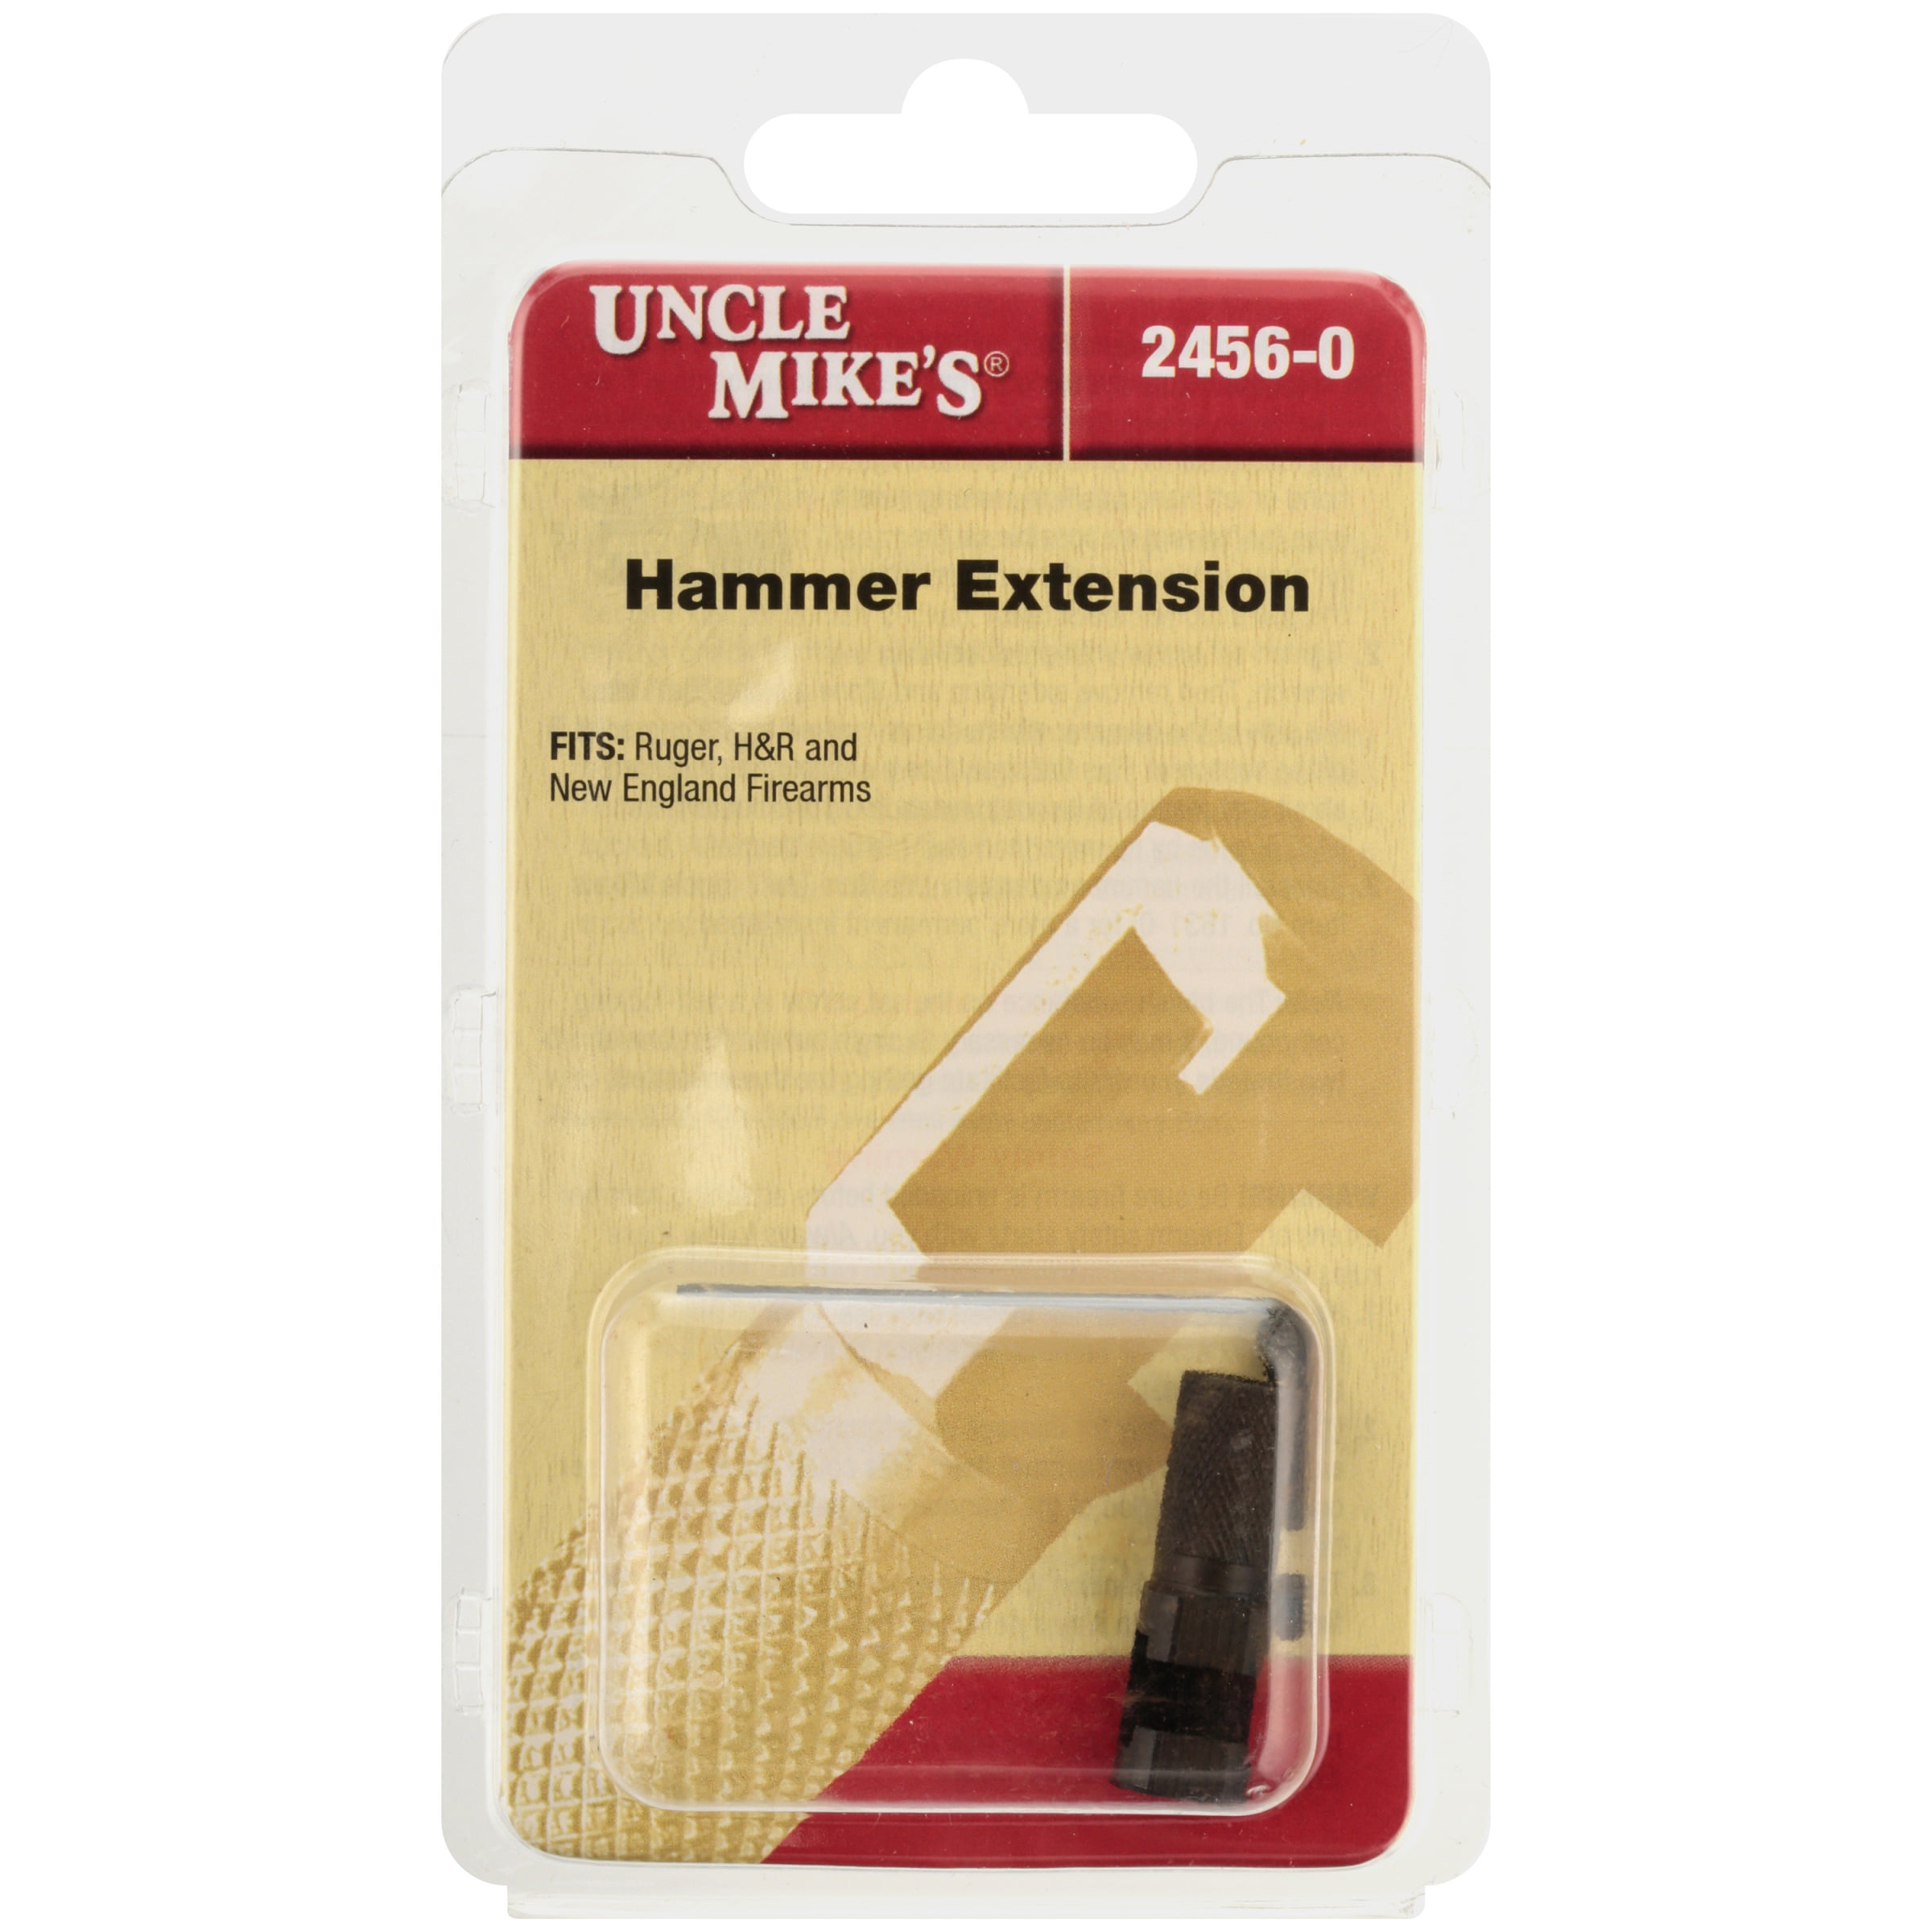 UNCLE MIKES HAMMER EXTENTION FOR RUGER H&R NEW ENGLAND FIREARMS RIFLE SCOPE 